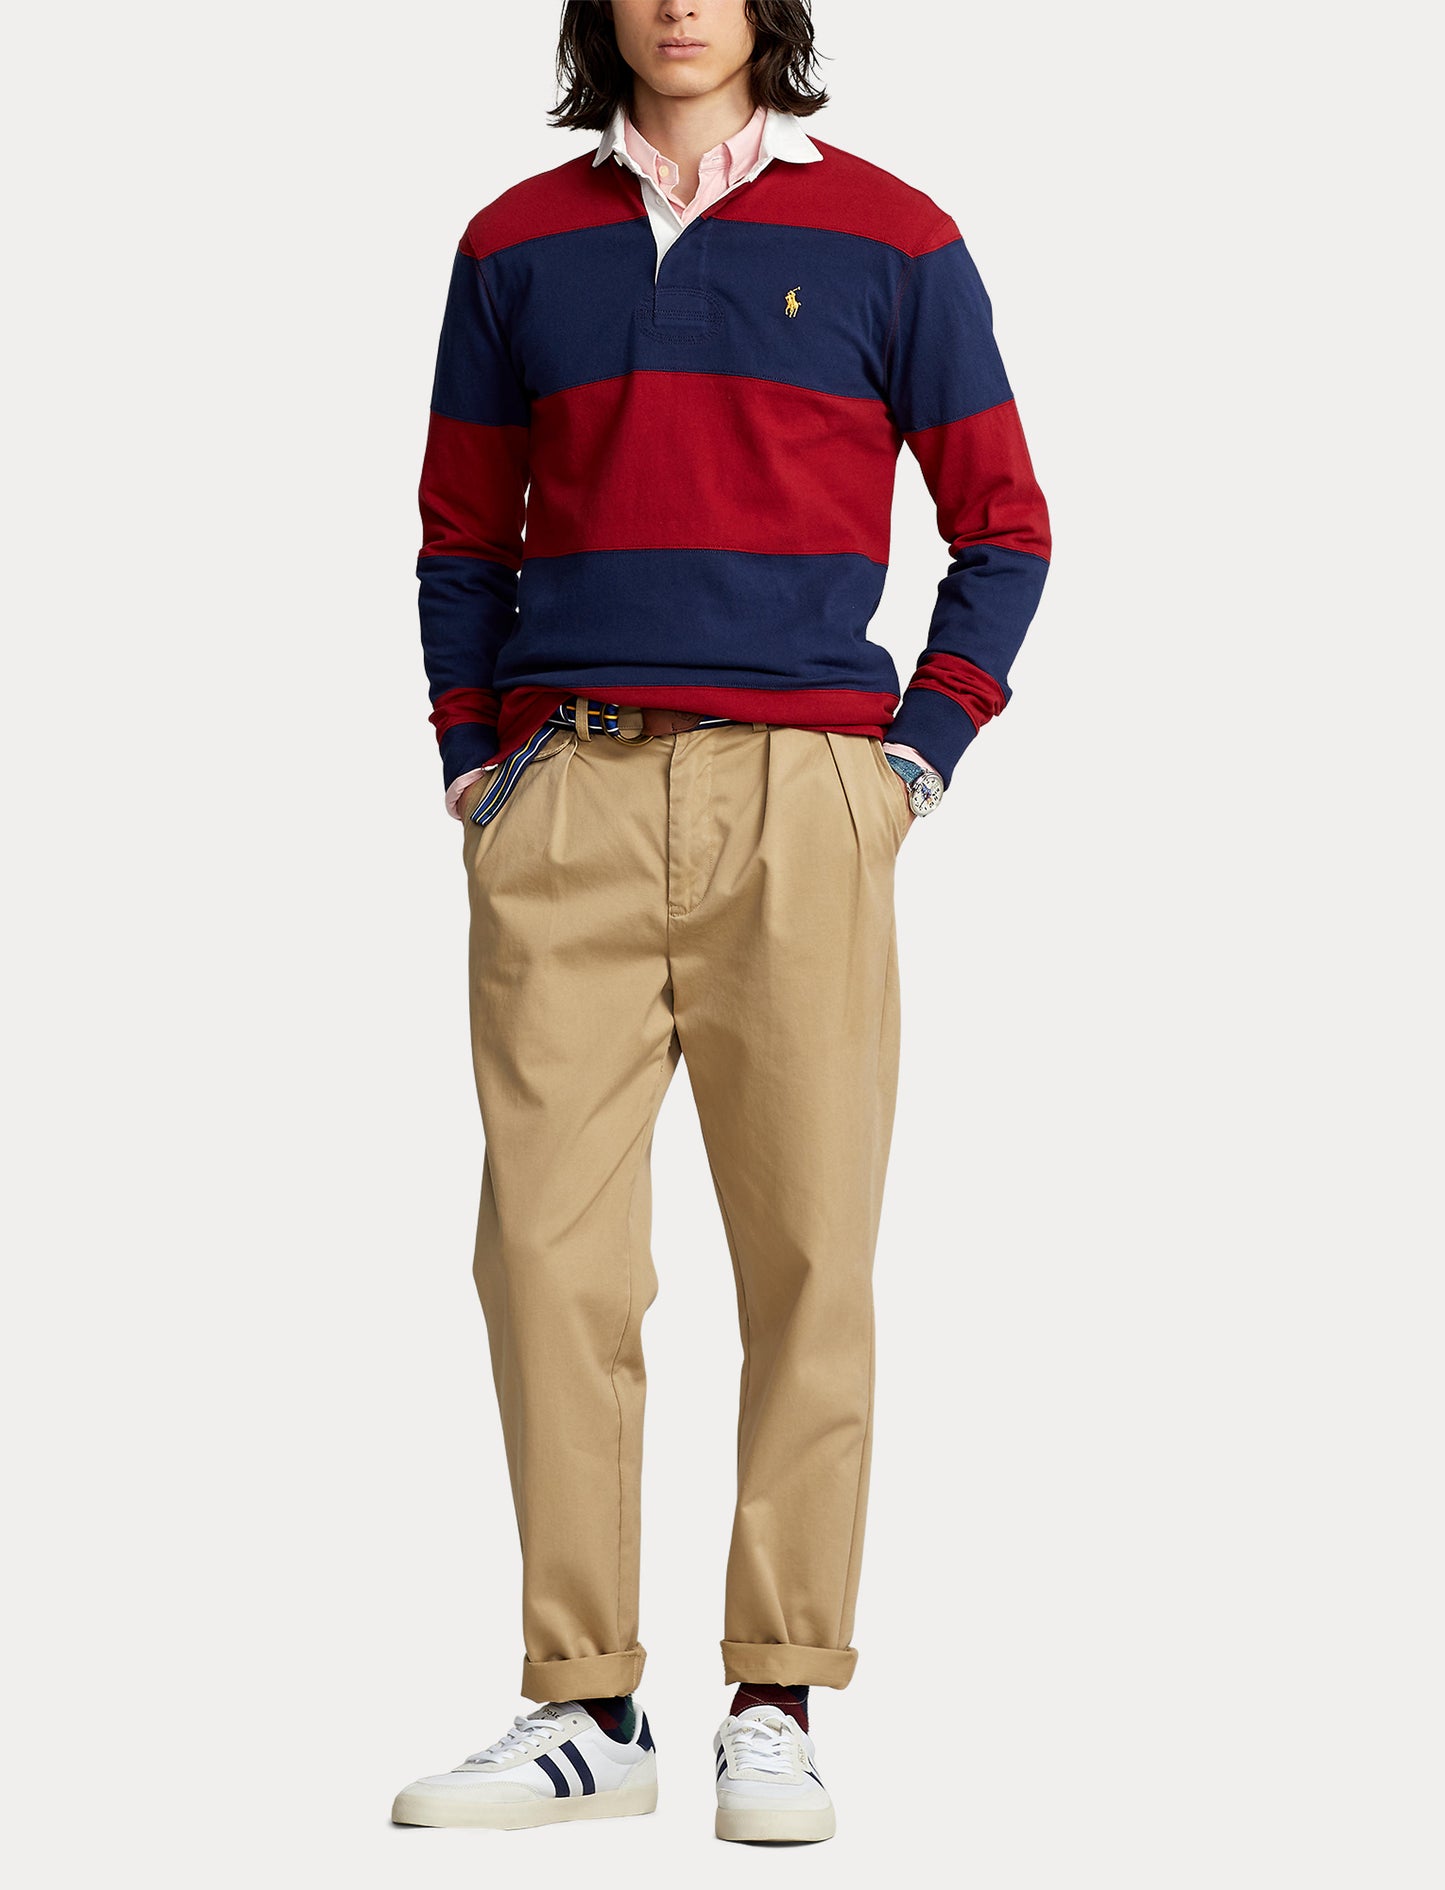 Polo Ralph Lauren Rugby Top Navy/Red